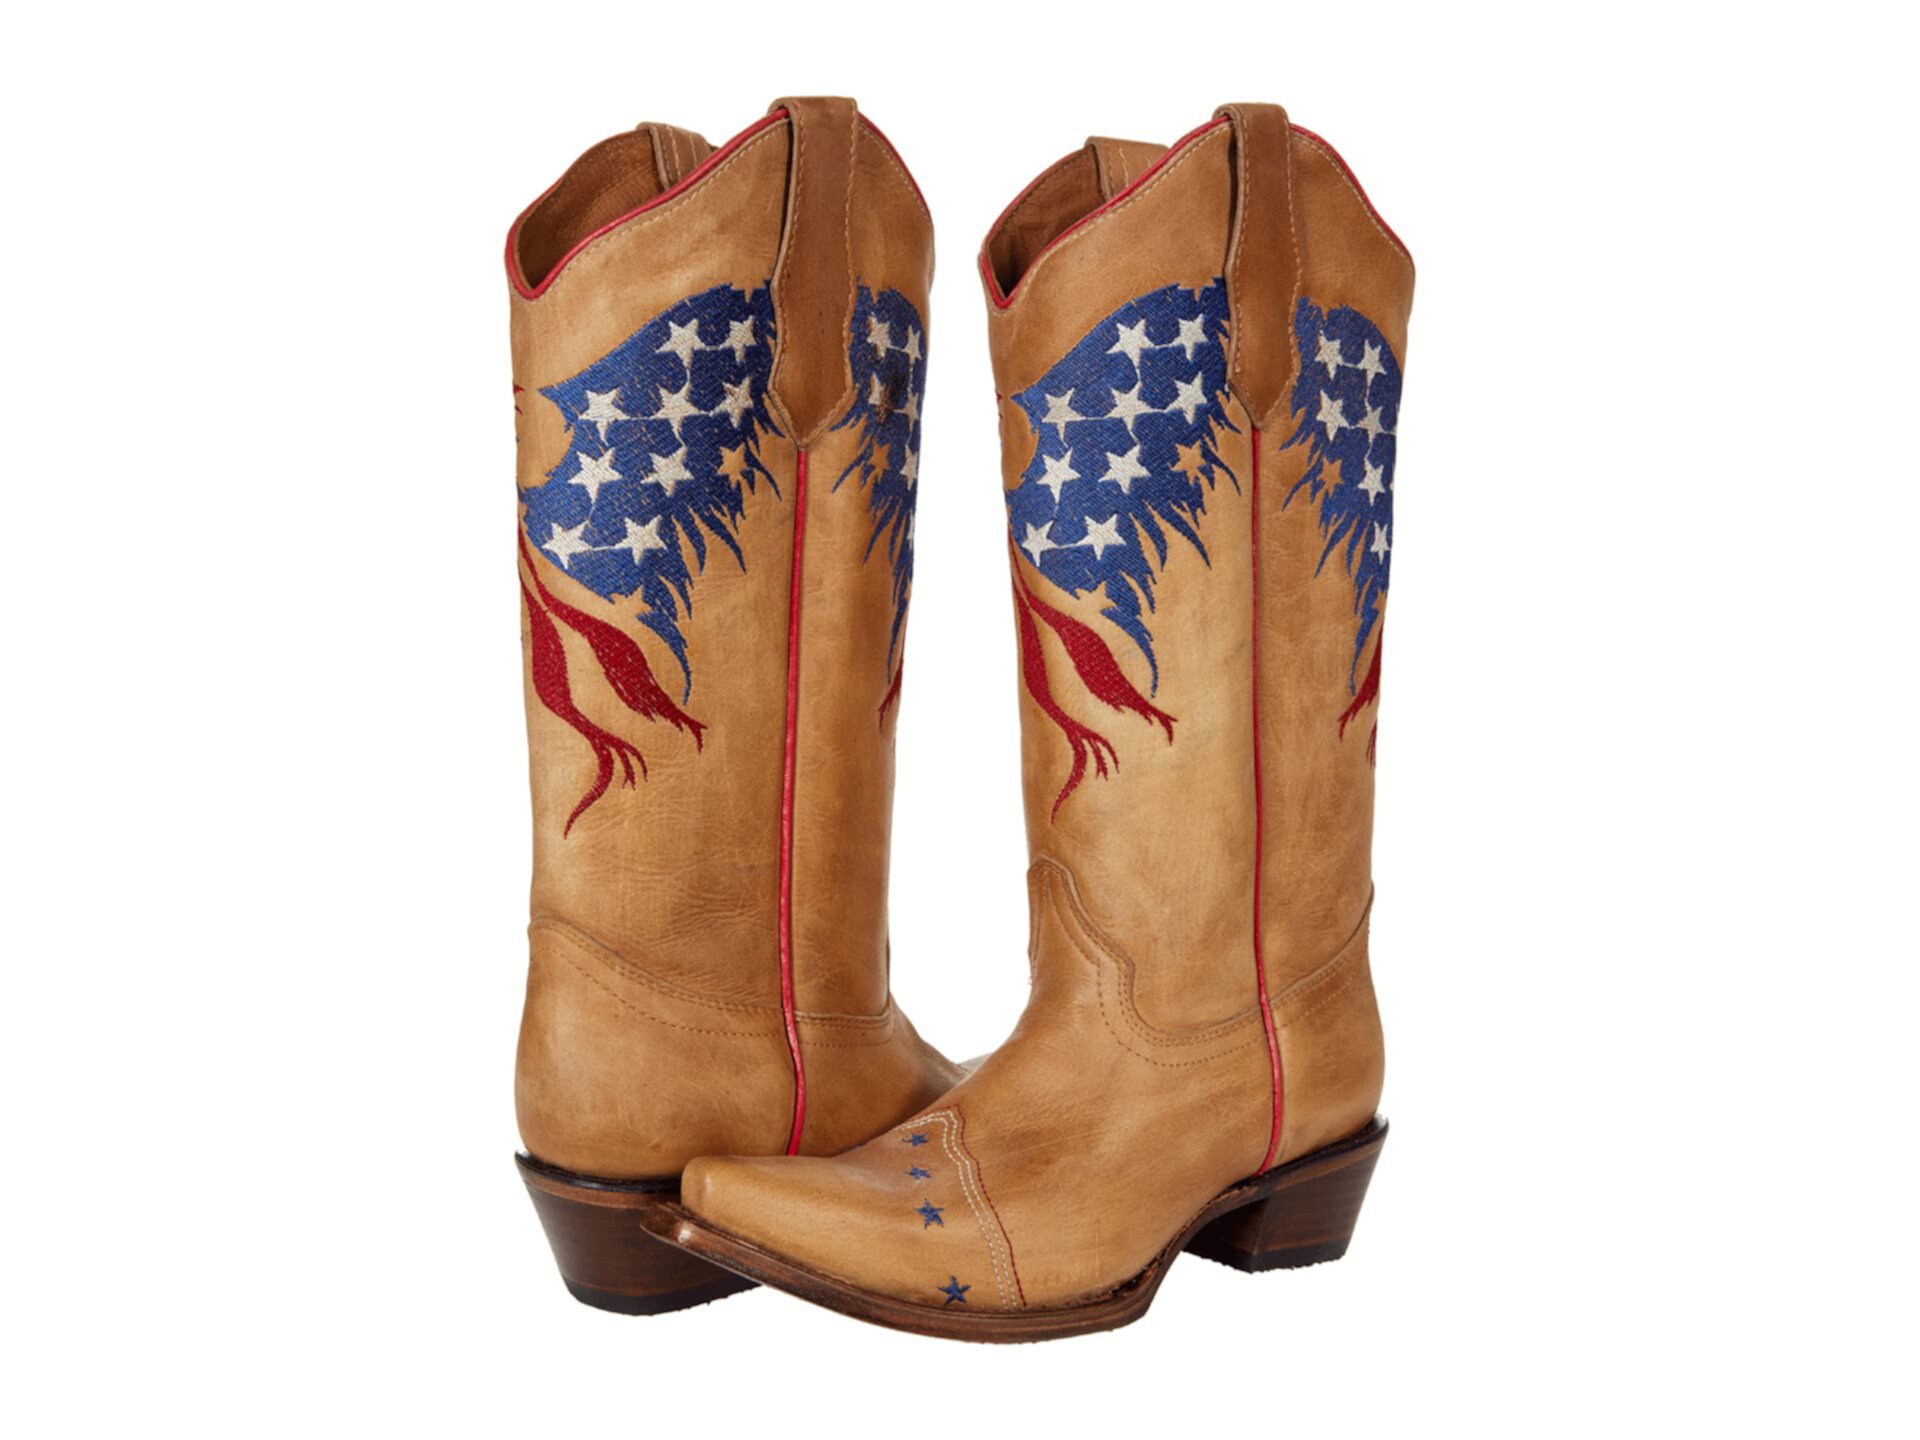 L5713 Corral Boots